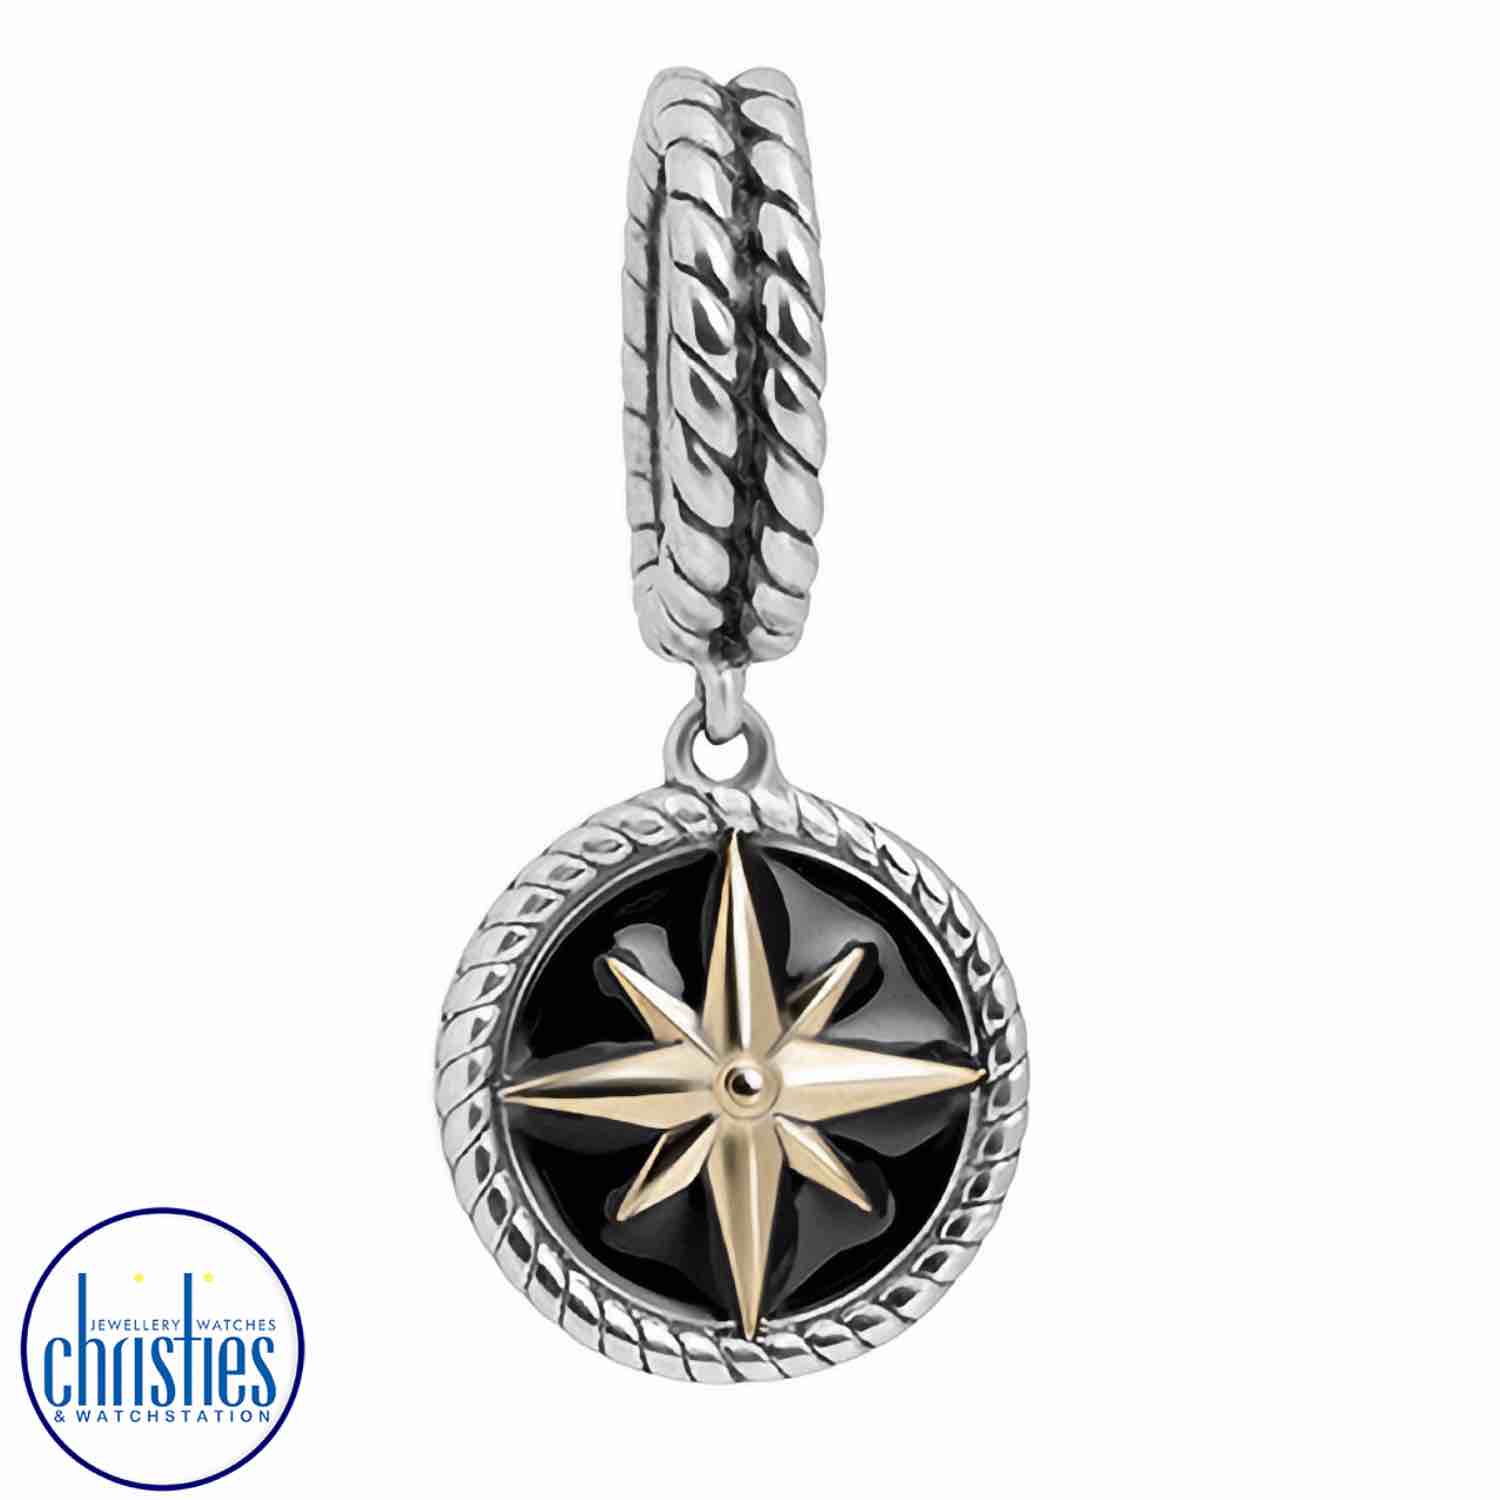 LKD056 Evolve Silver and Gold Compass Charm evolve jewellery stockists nz